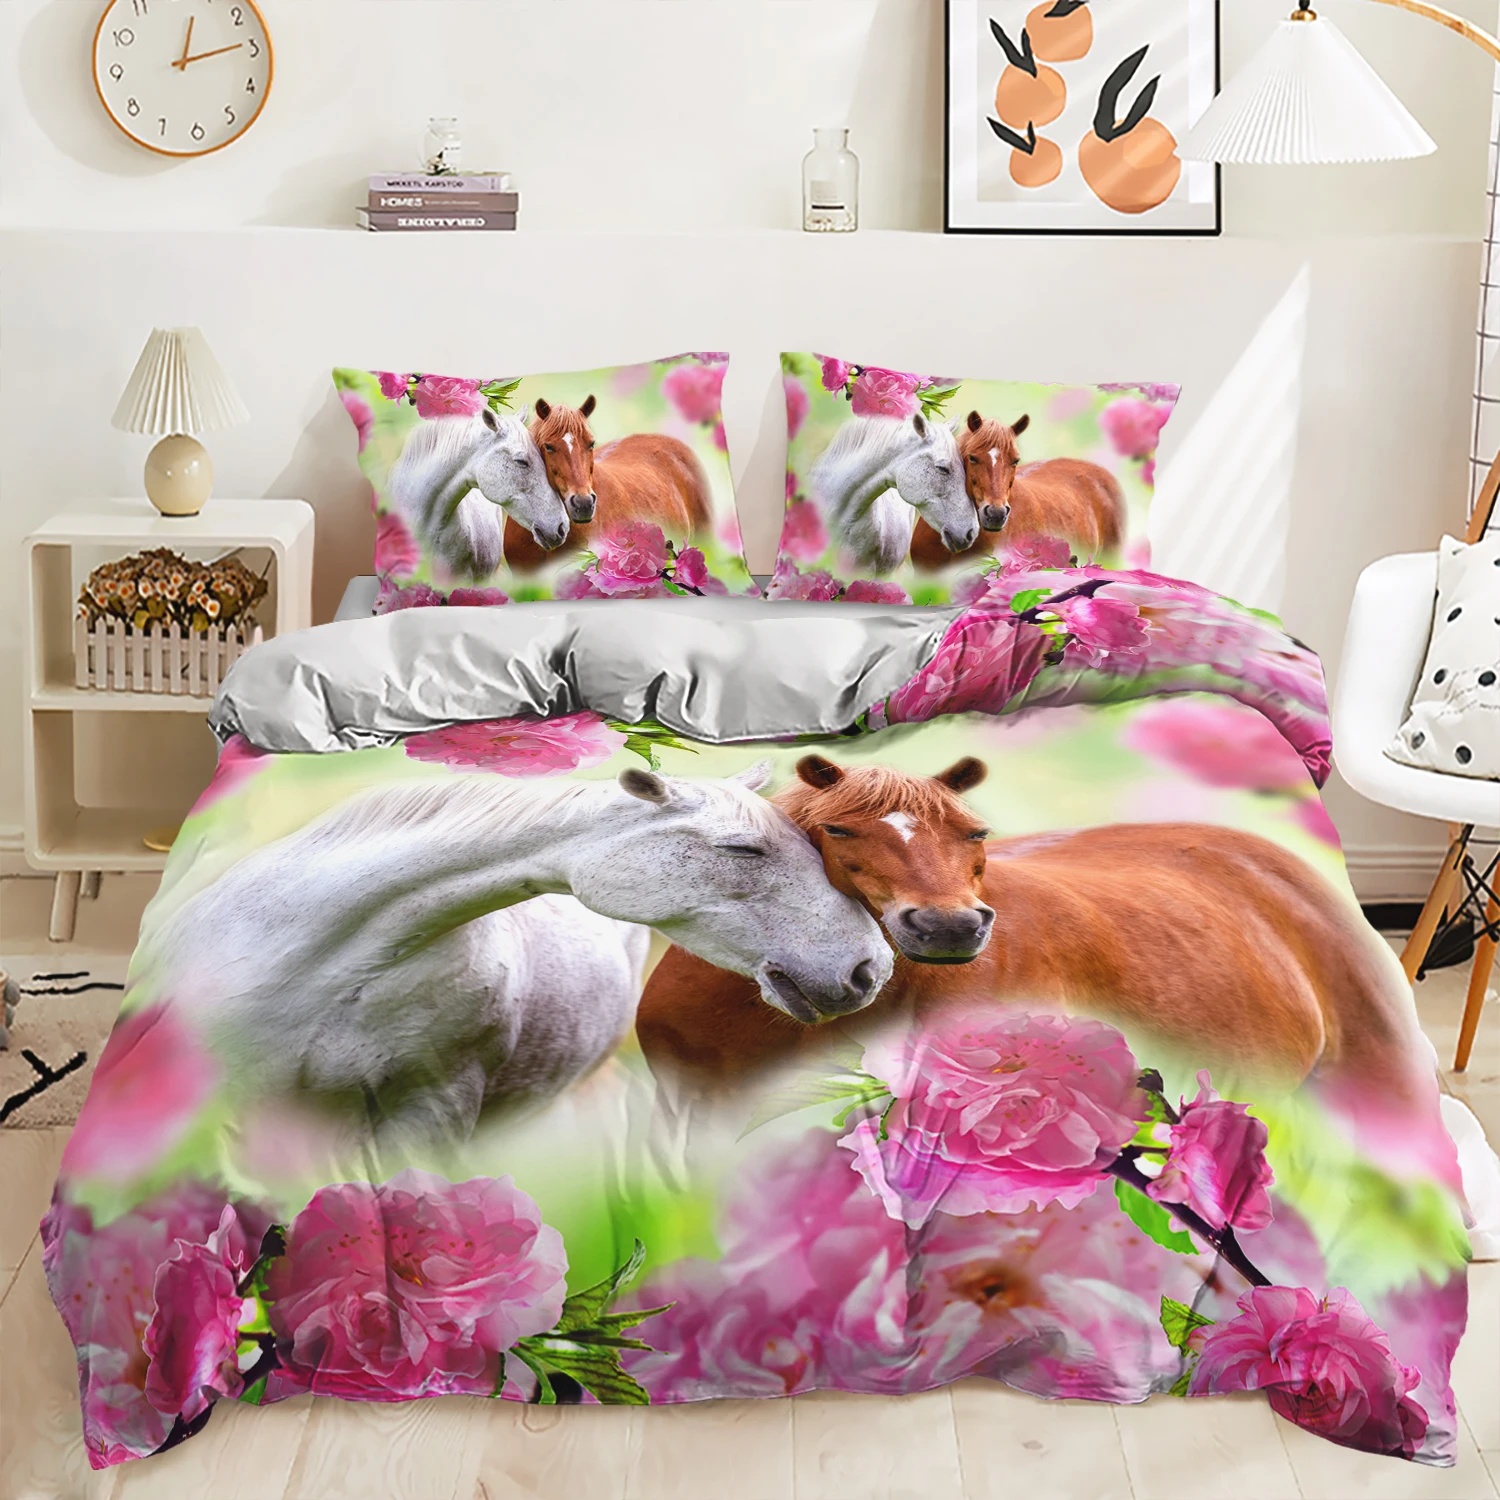 

White Horse Bedding Set Pink Flower Duvet Cover Animal Home Textile with Pillowcases Twin Full Queen King Single Double Size 3pc